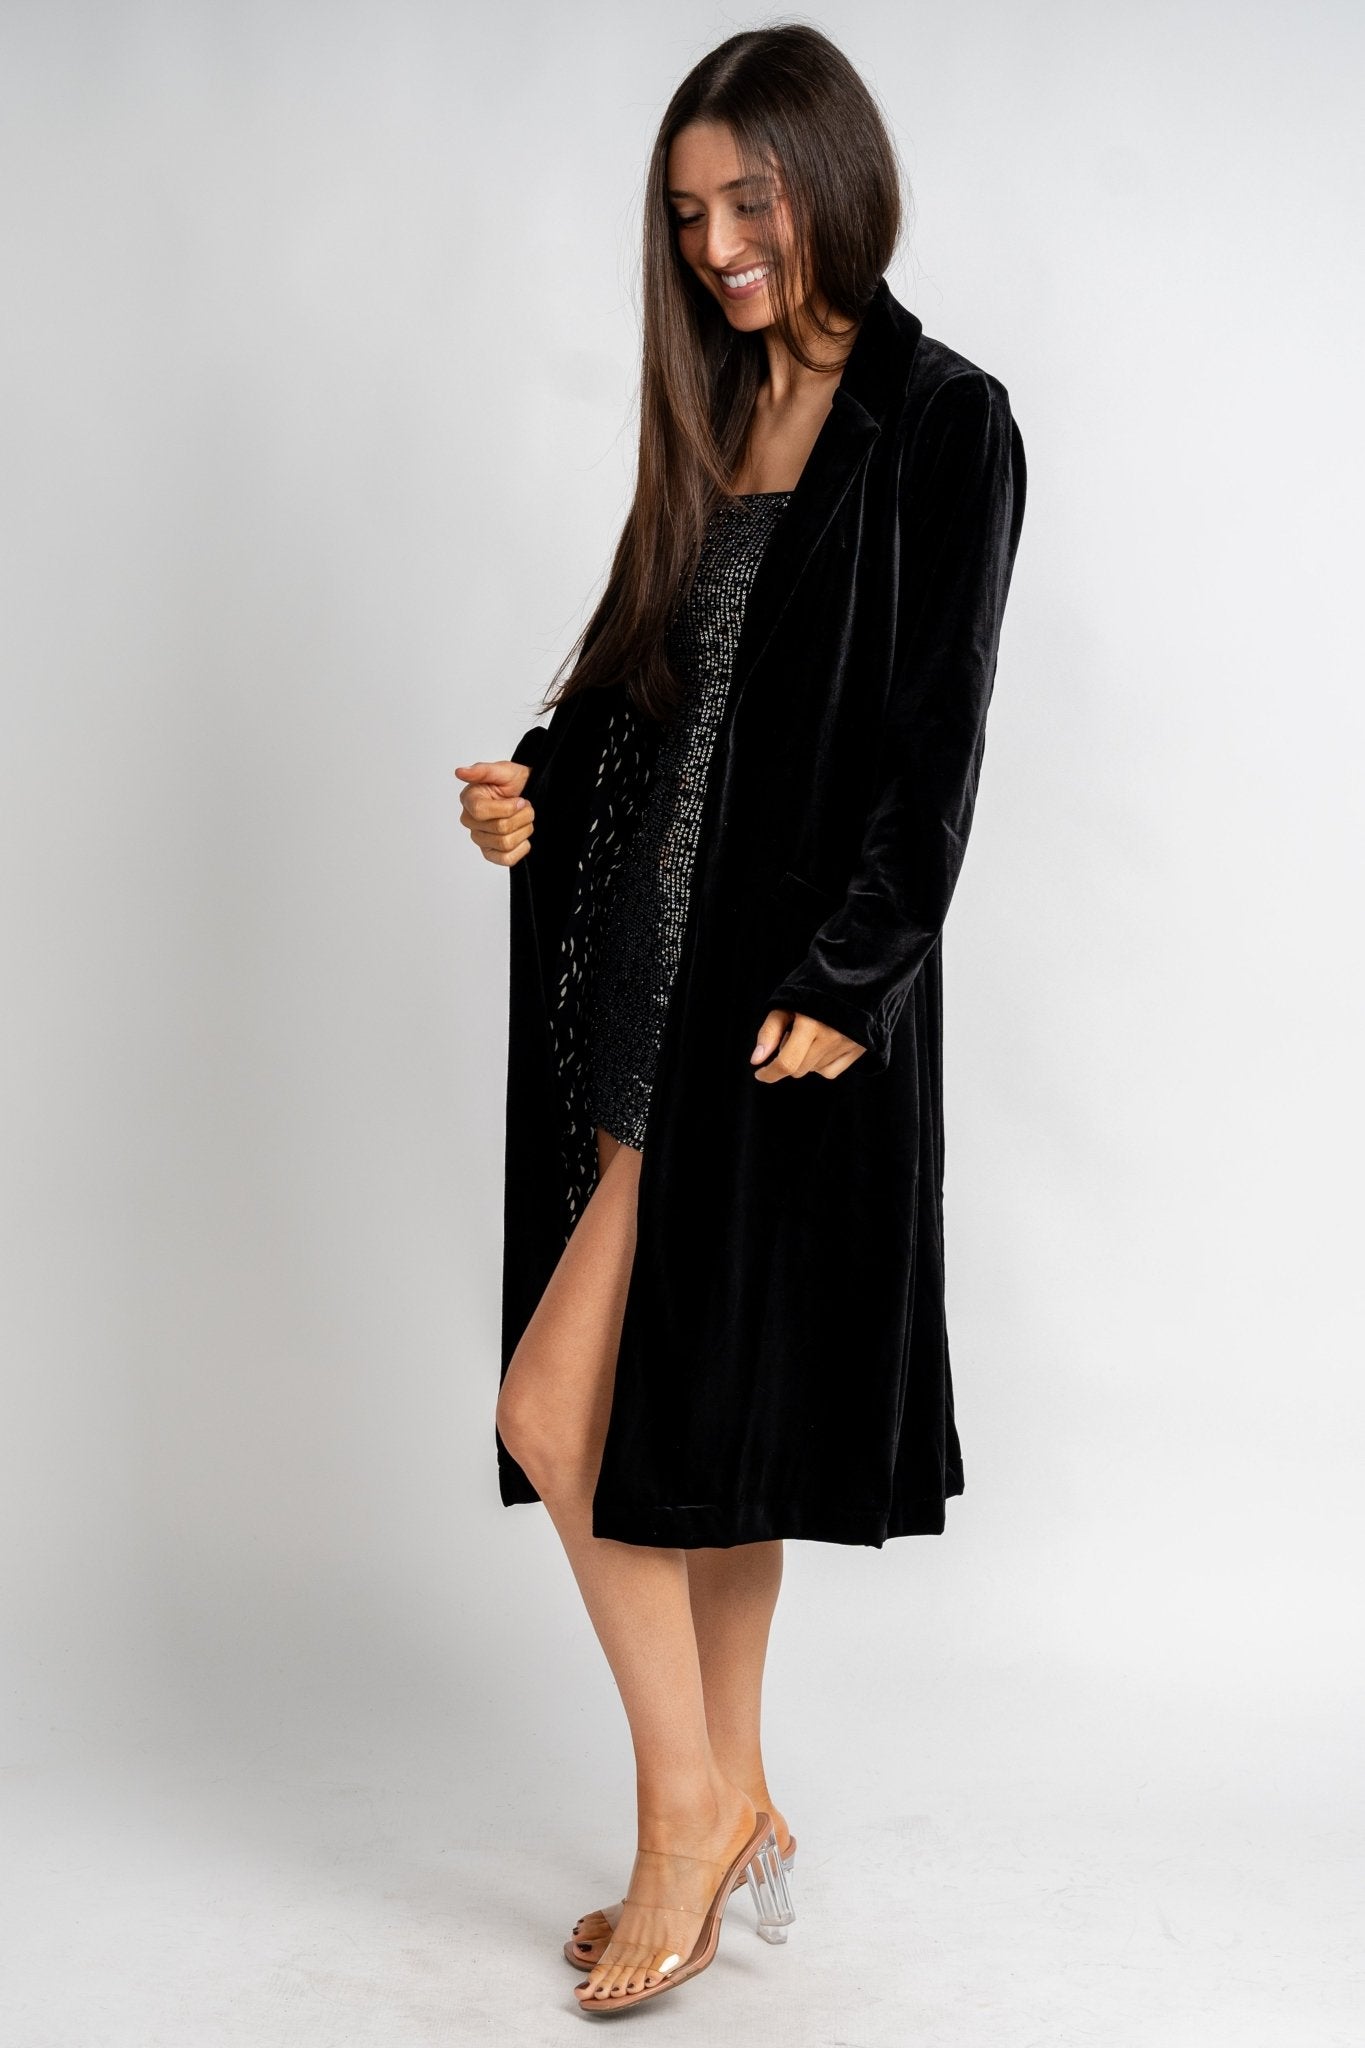 Velvet duster coat black - Trendy New Year's Eve Dresses, Skirts, Kimonos and Sequins at Lush Fashion Lounge Boutique in Oklahoma City